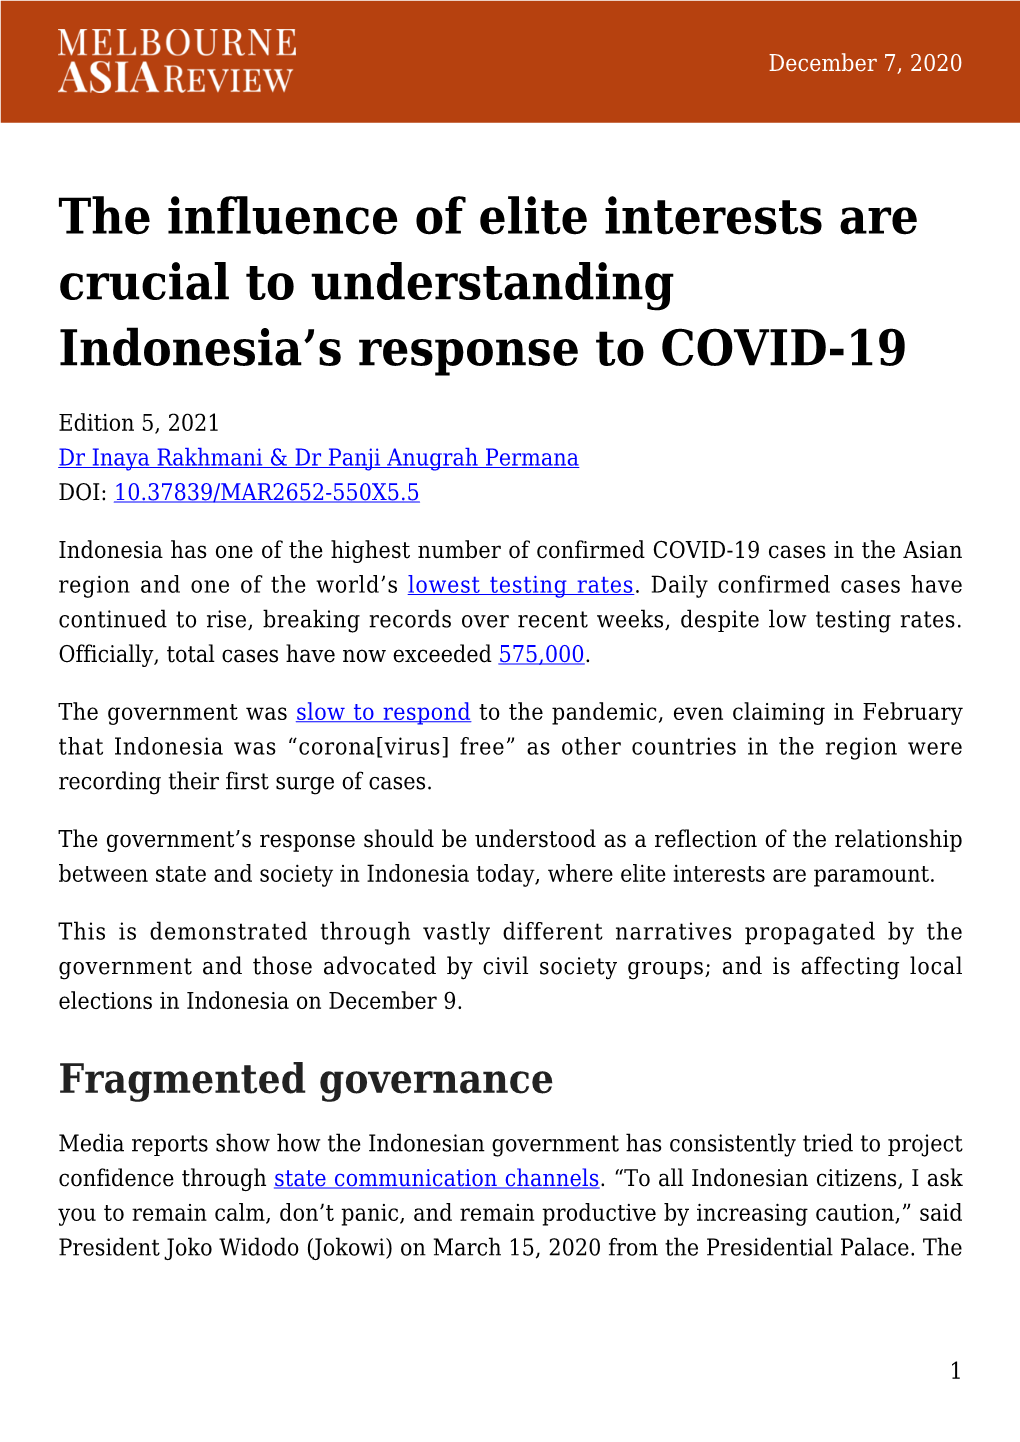 The Influence of Elite Interests Are Crucial to Understanding Indonesia's Response to COVID-19